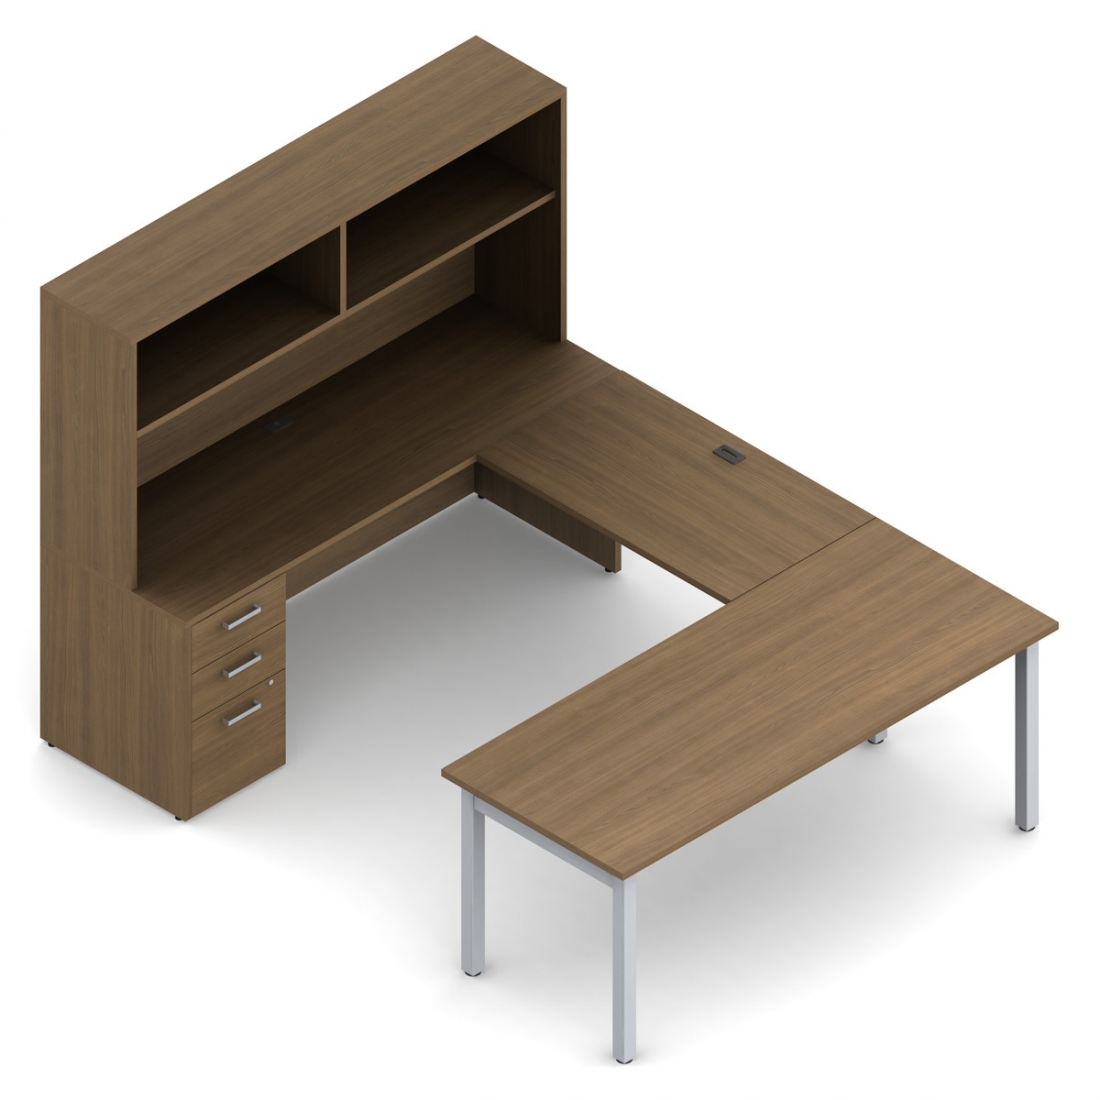 Ionic | "U" Shaped Suite with Table Desk - 72"W x 96"D x 65"H overall